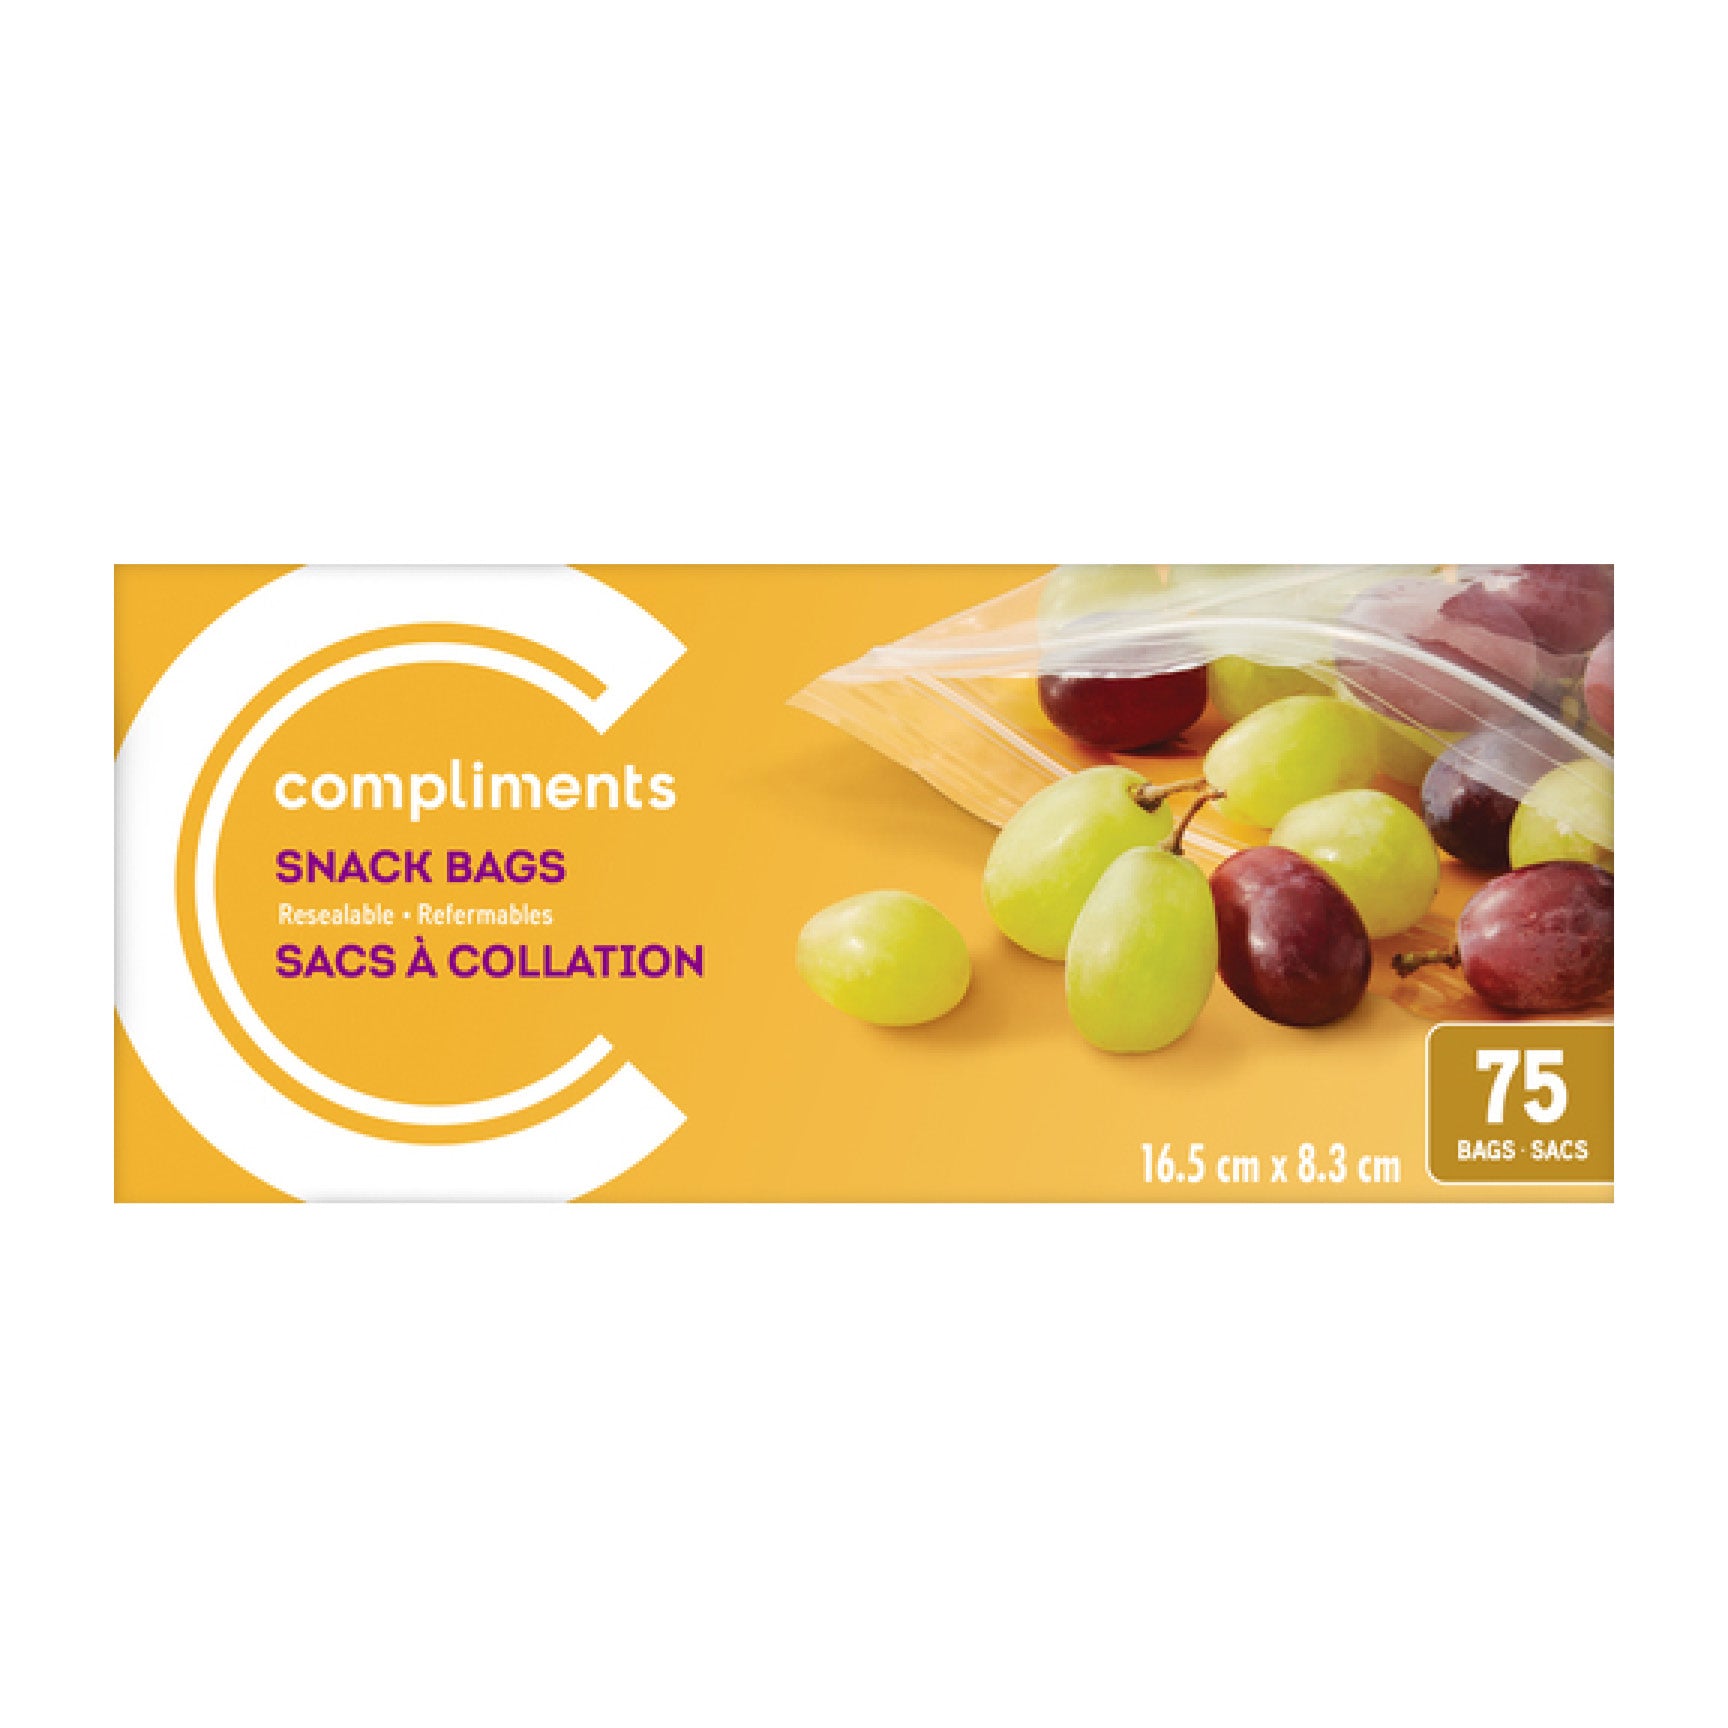 Compliments Snack Bags, 75pk